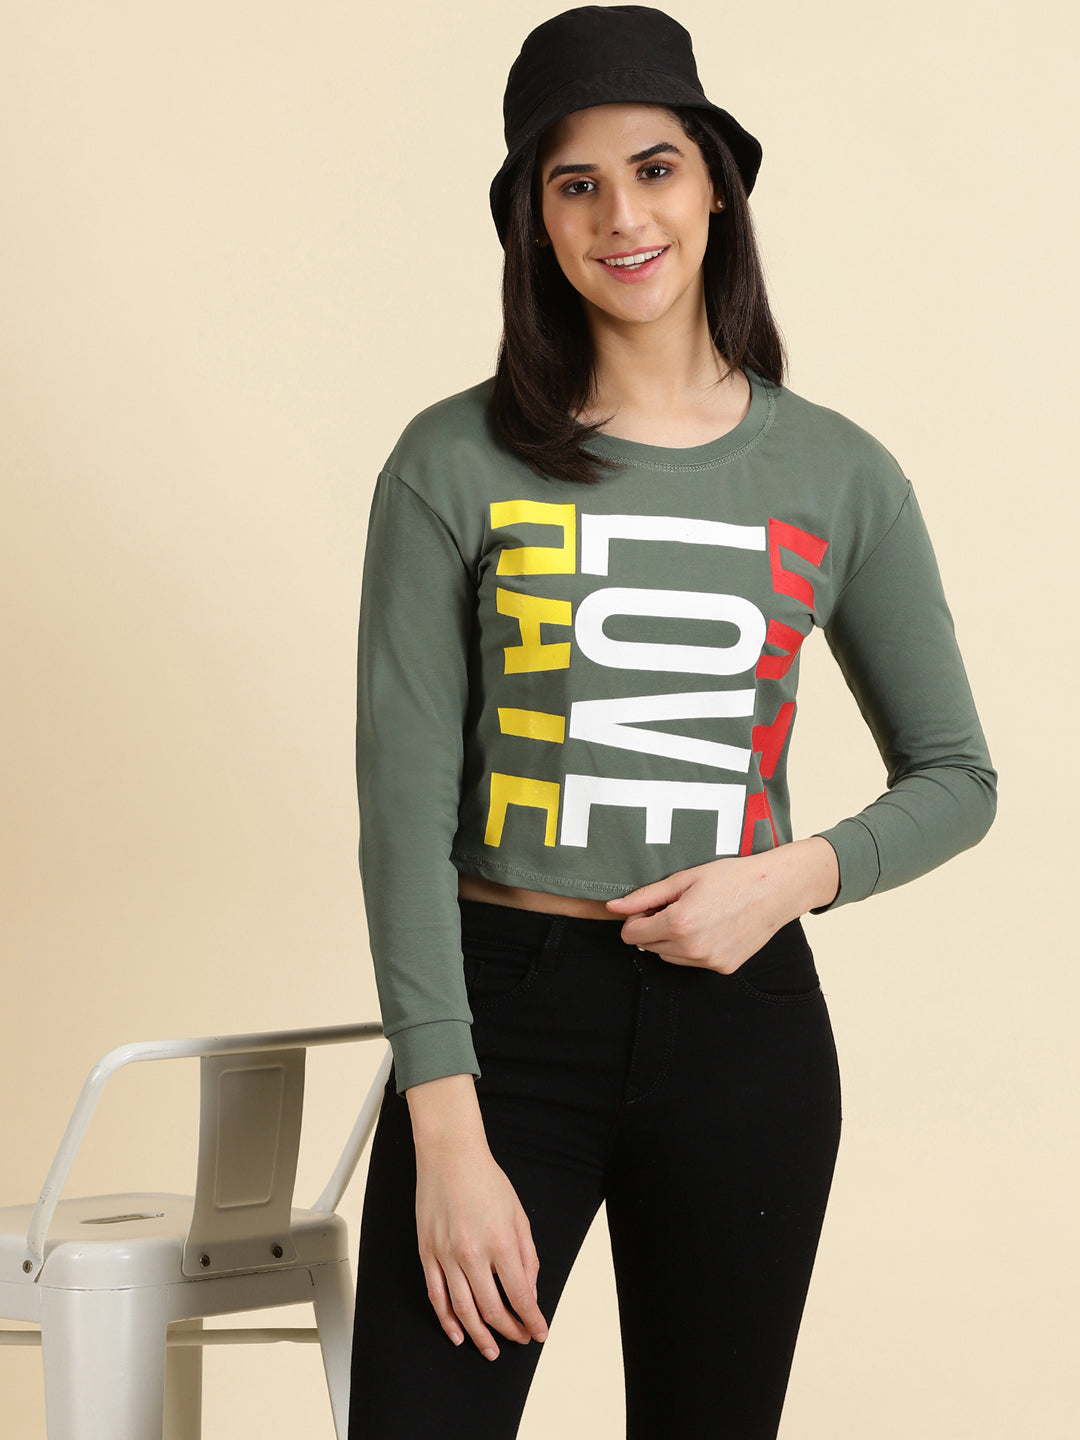 Women's Olive Solid Top